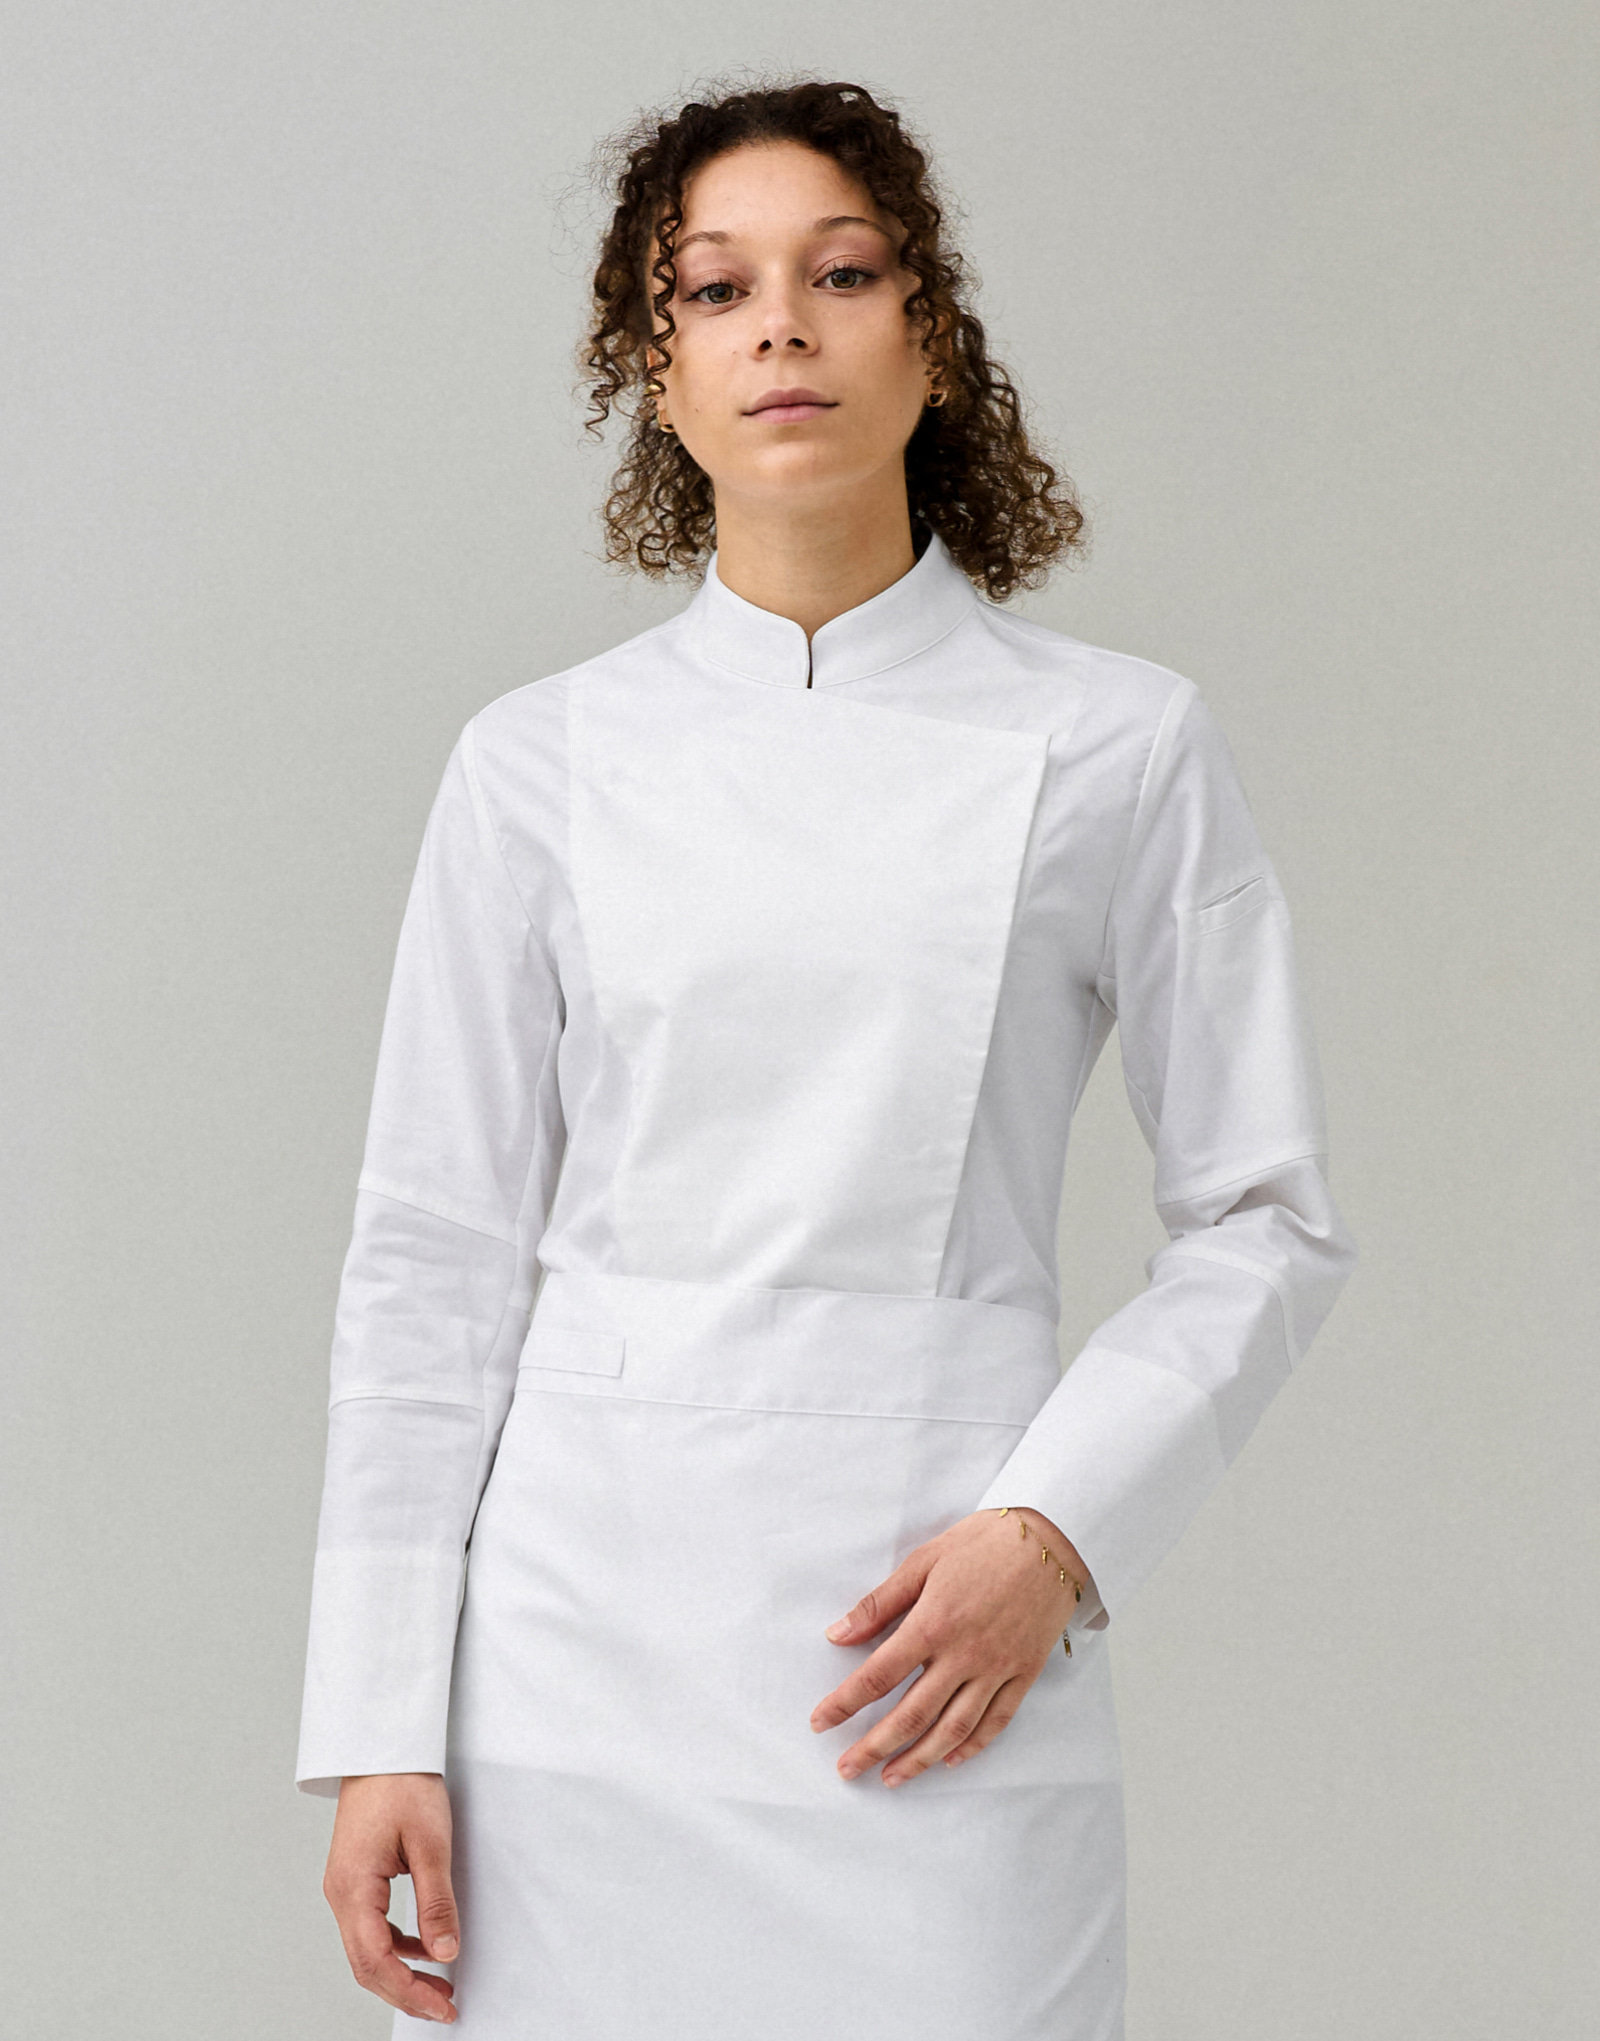 Back side cooling stretch women chef coat #AJ1945-1 White